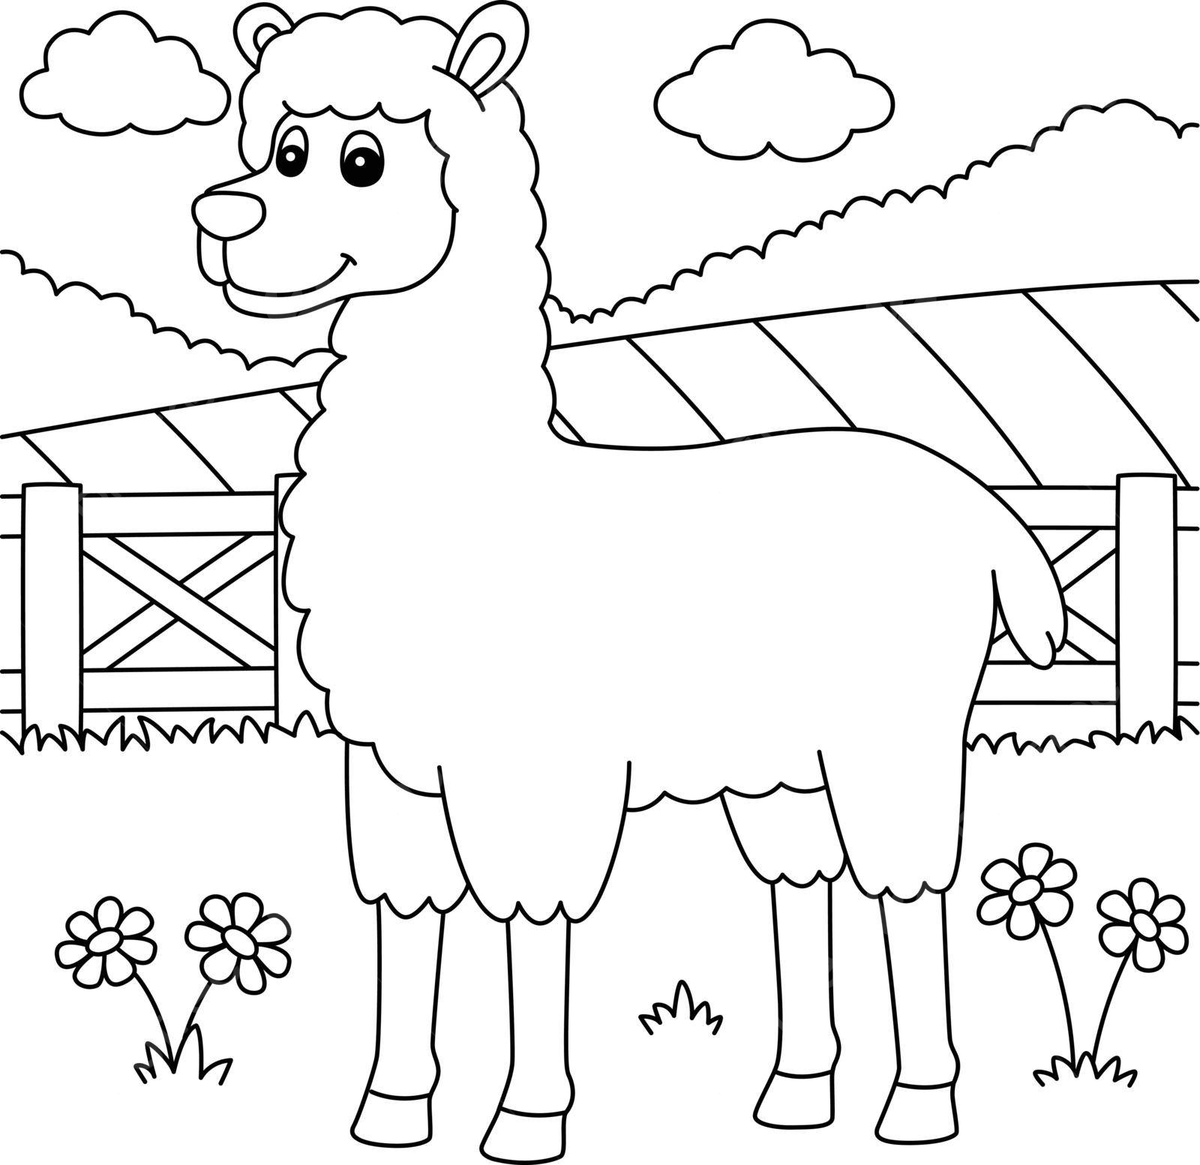 Llama coloring page for kids colouring page vector nature vector colouring page vector nature png and vector with transparent background for free download